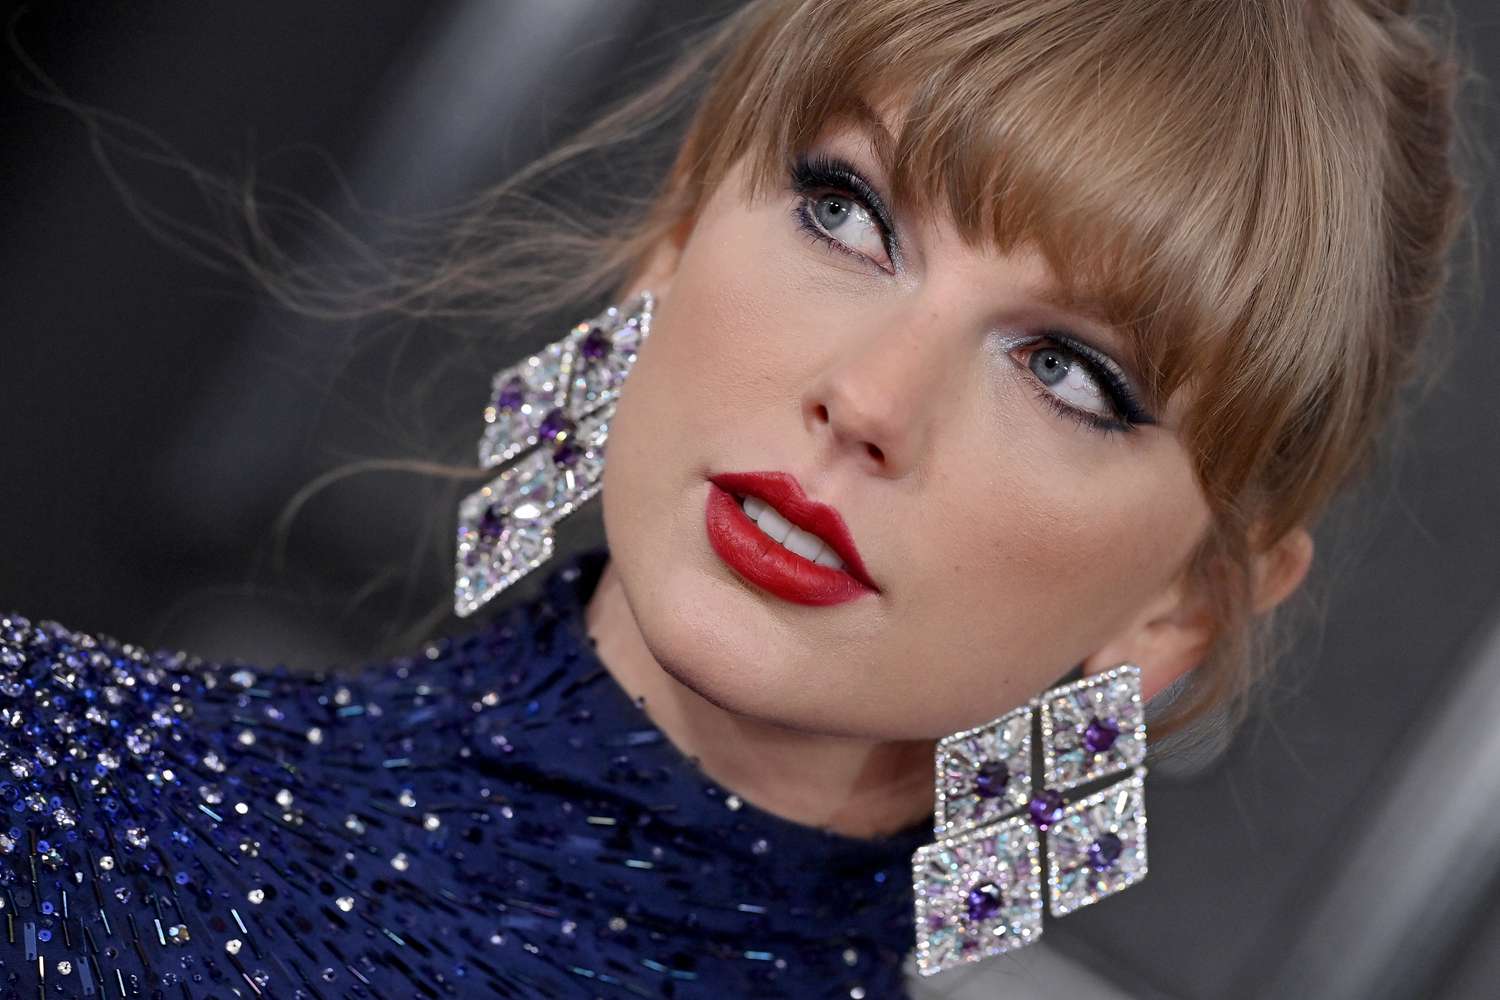 Taylor Swift’s Business Acumen & Her Empire Beyond Music